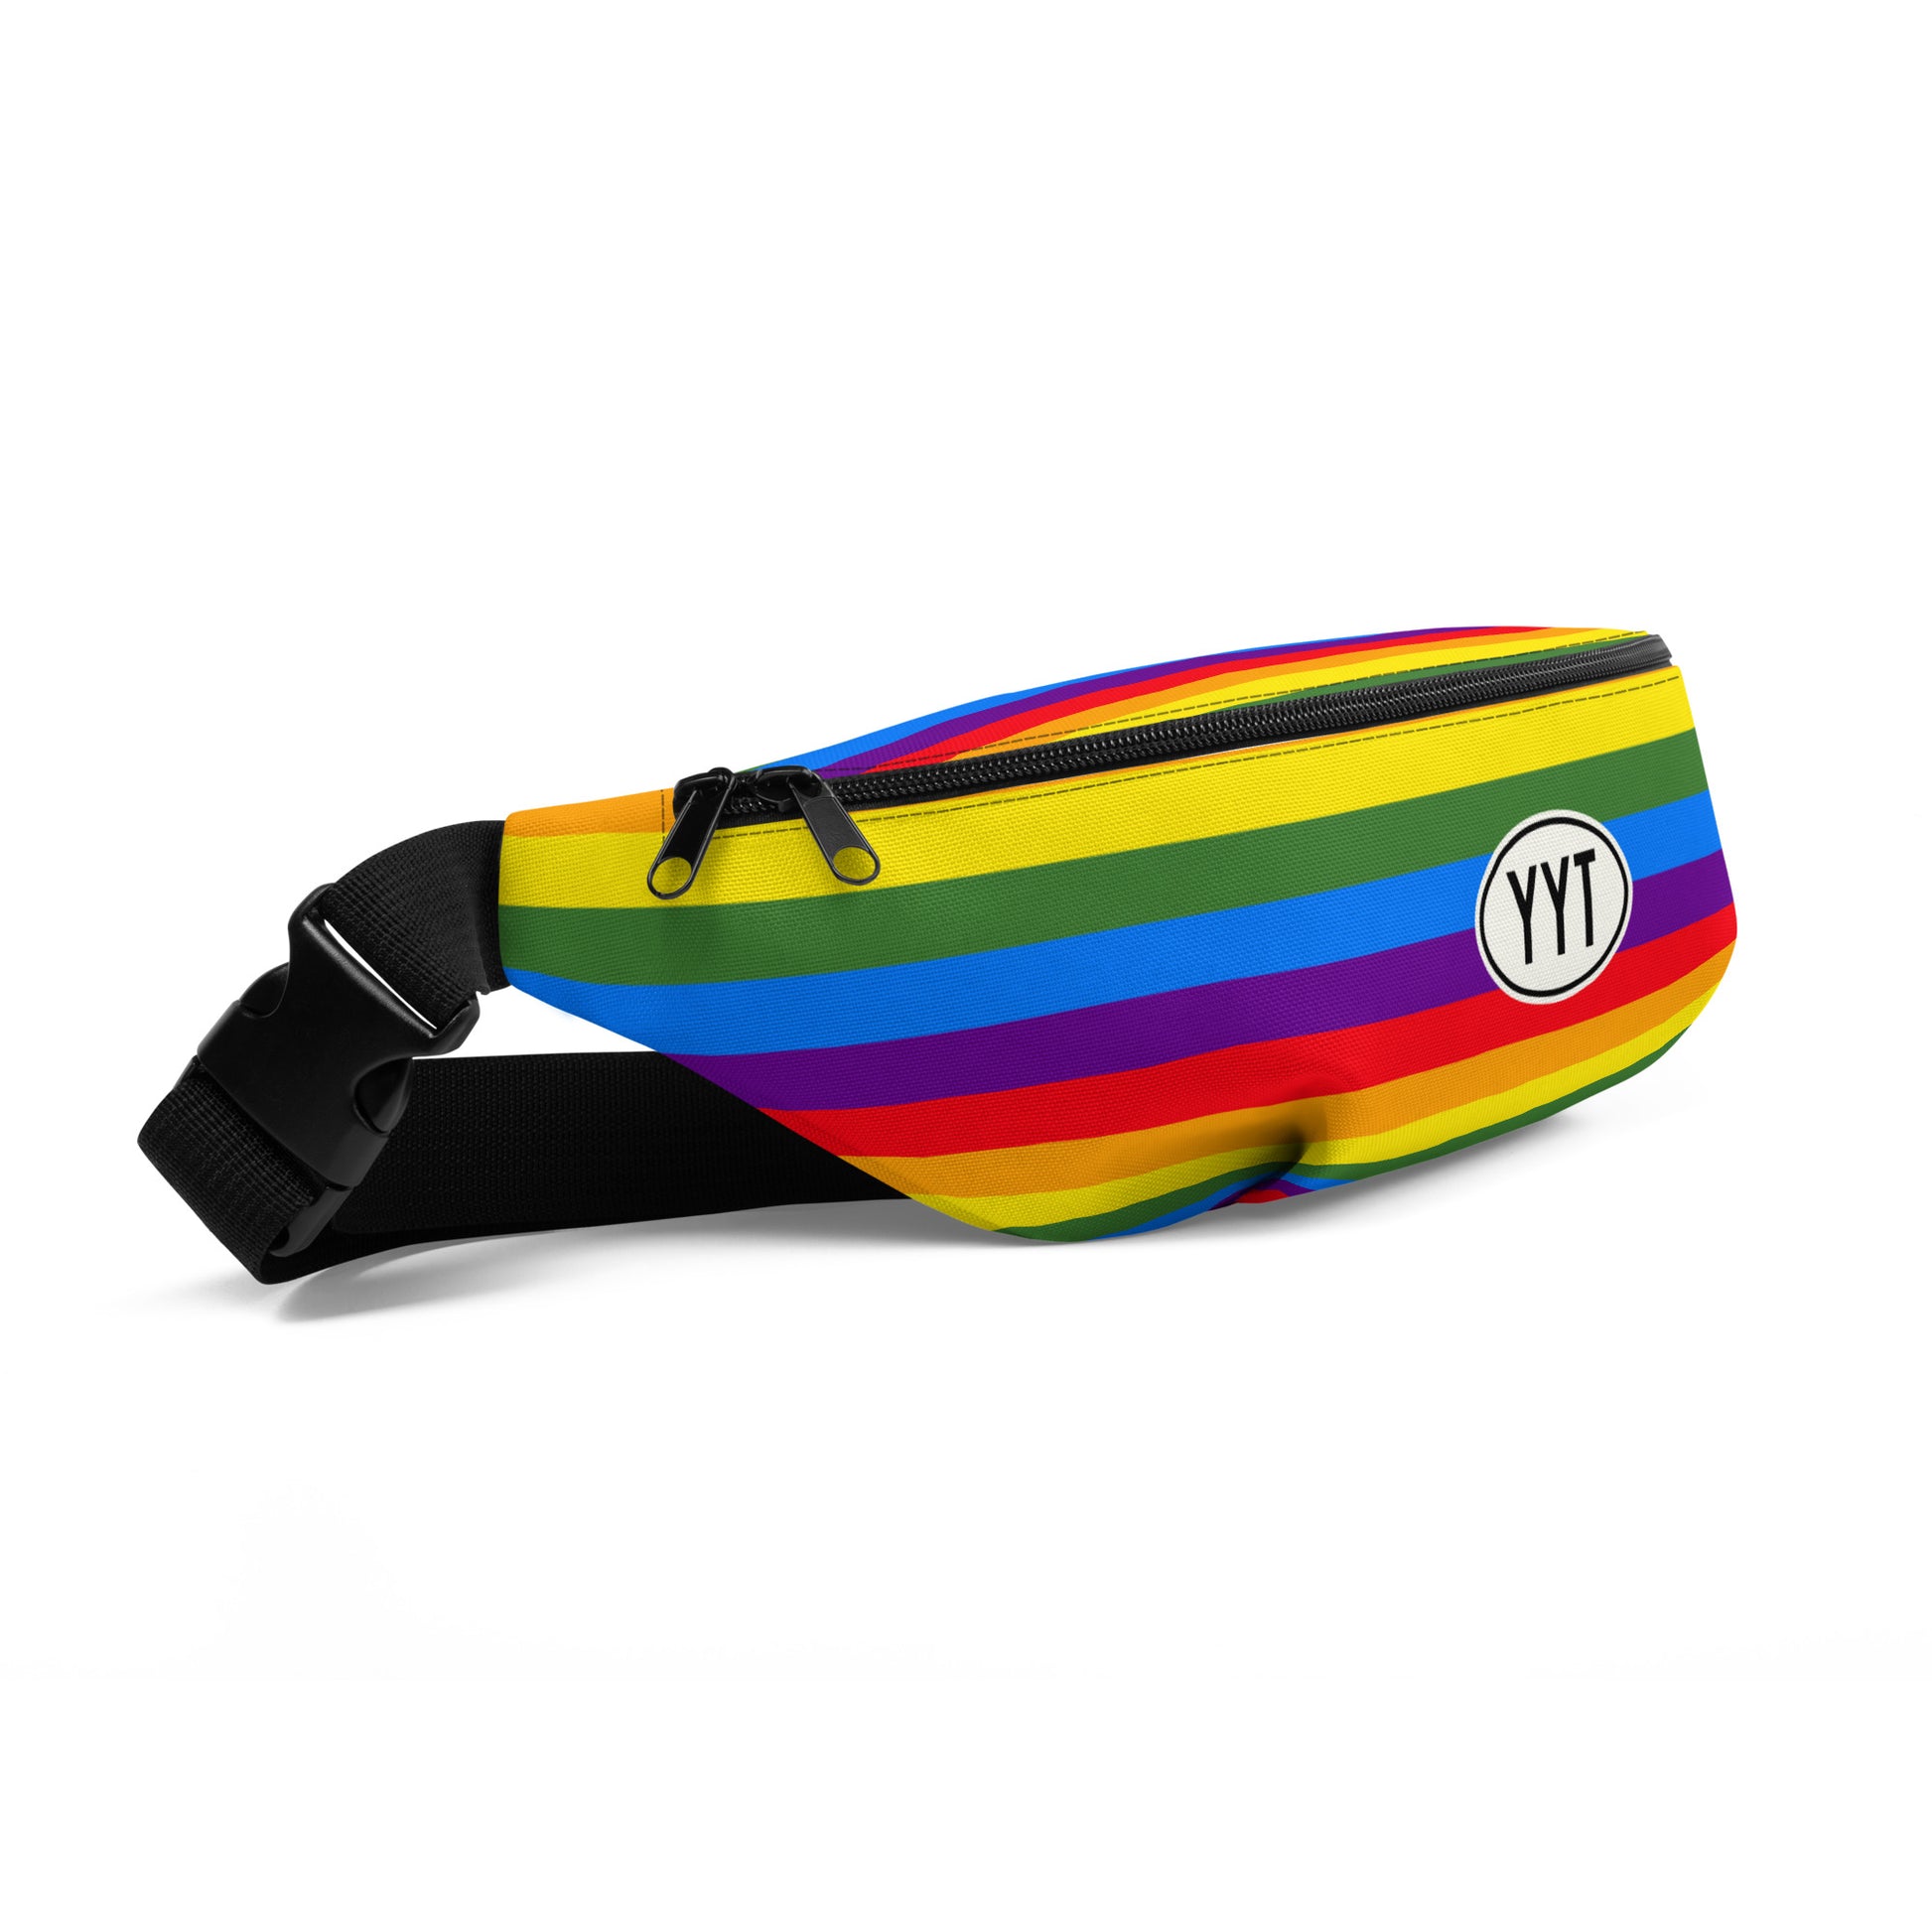 Travel Gift Fanny Pack - Rainbow Colours • YYT St. John's • YHM Designs - Image 07